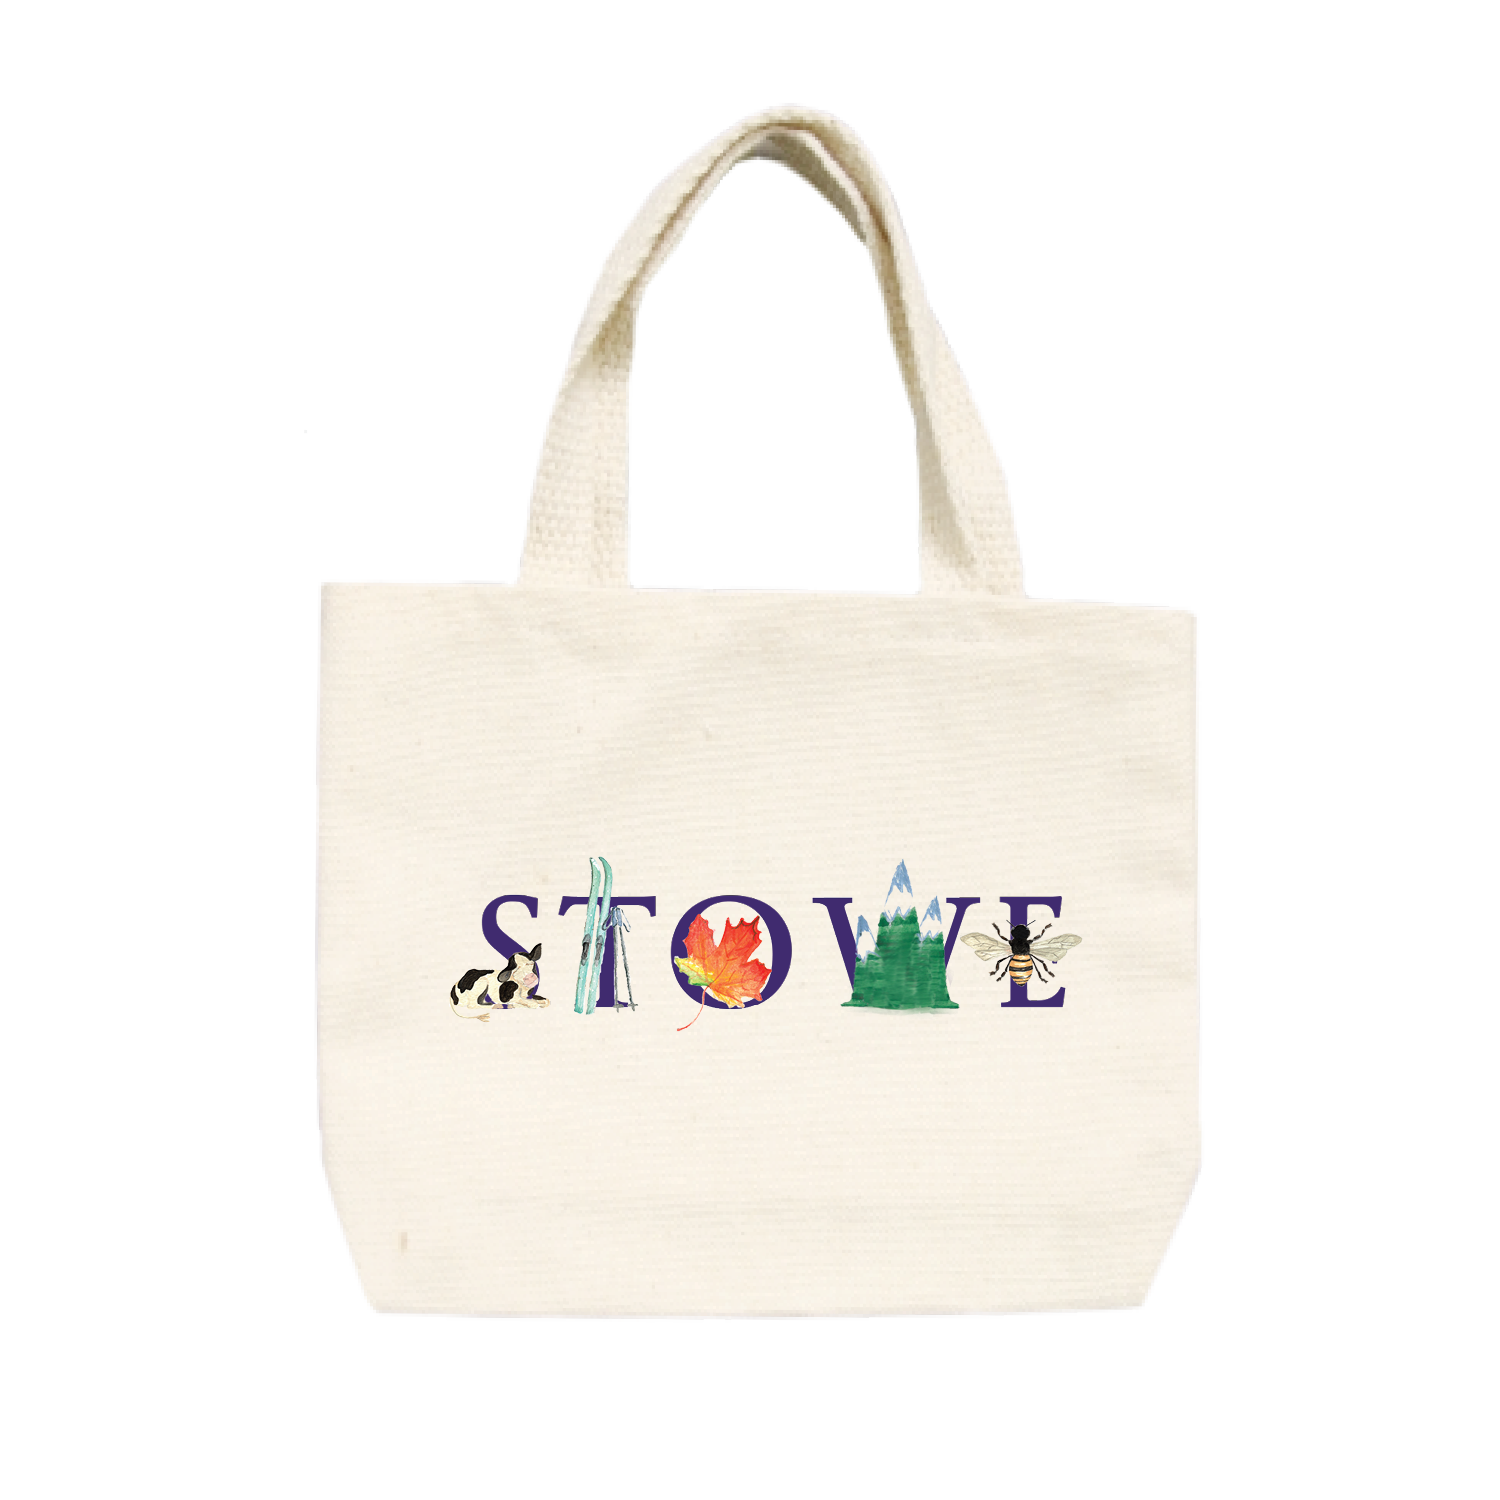 stowe, vt small tote